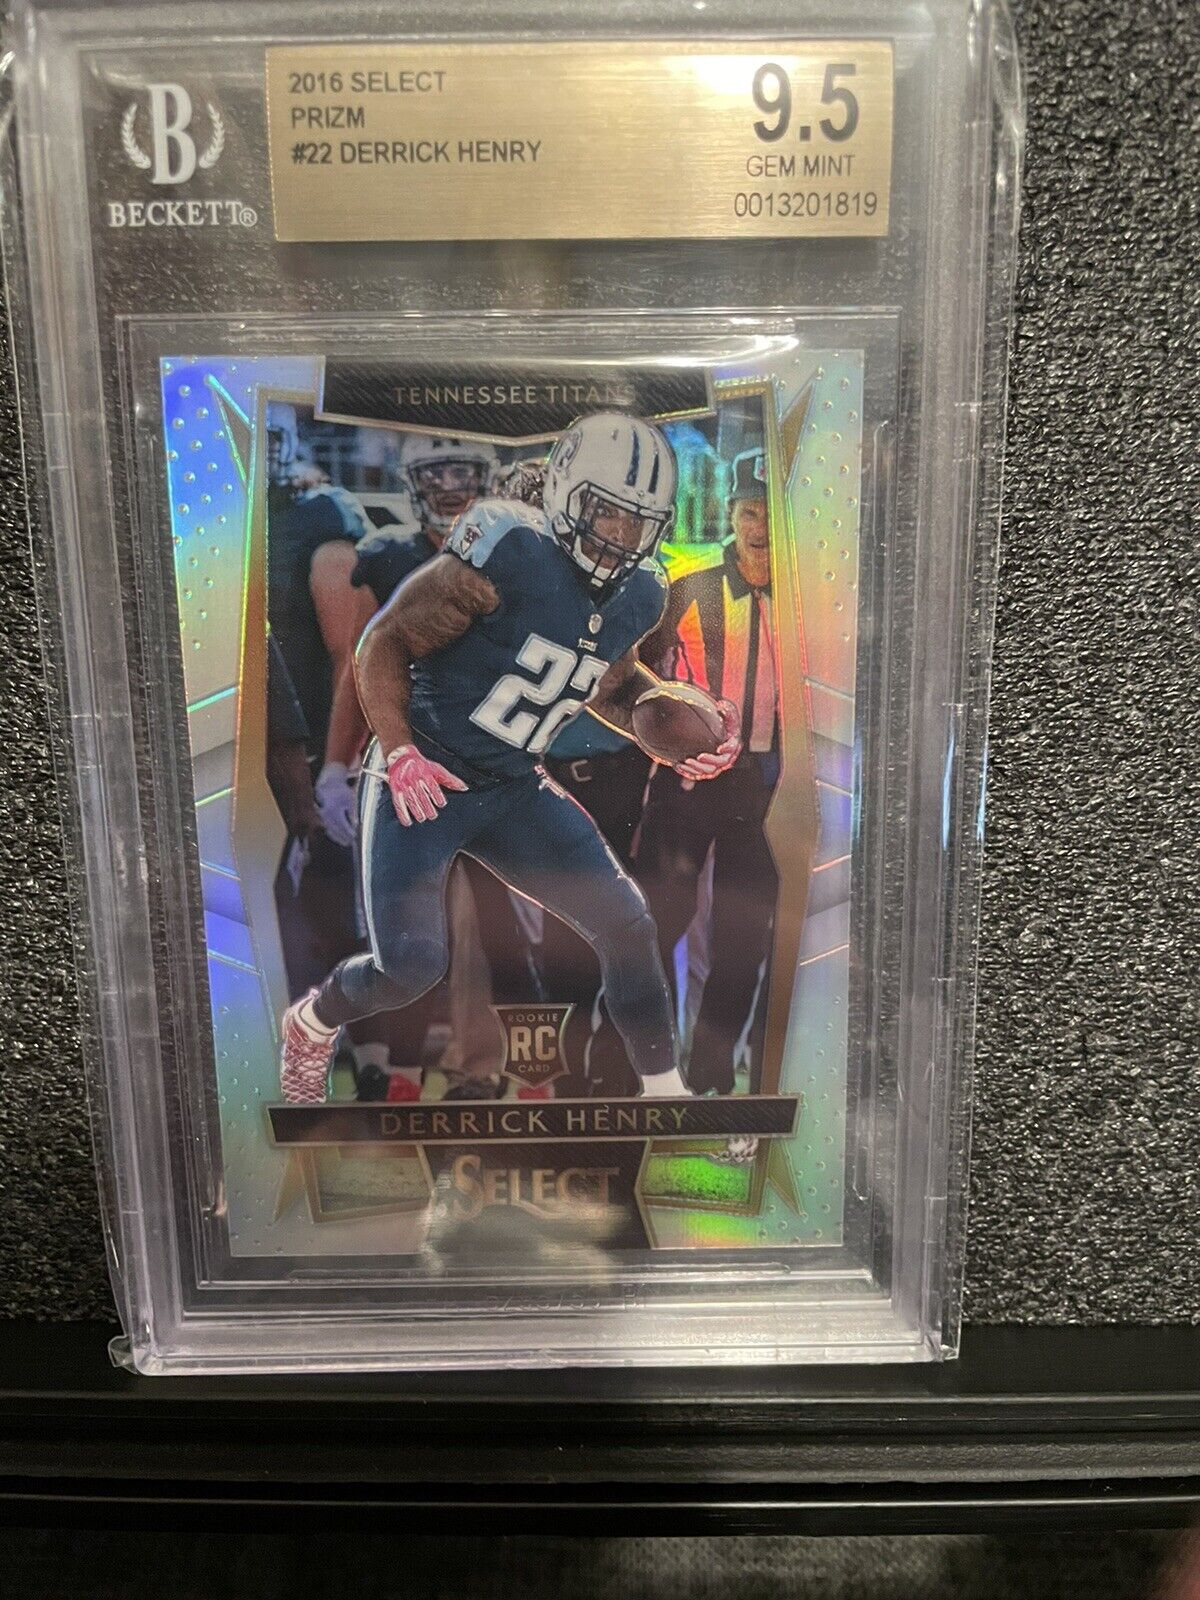 2016 Derrick Henry Select Rookie Panini Prizm Silver Parallel BGS 9.5 Titans NFL